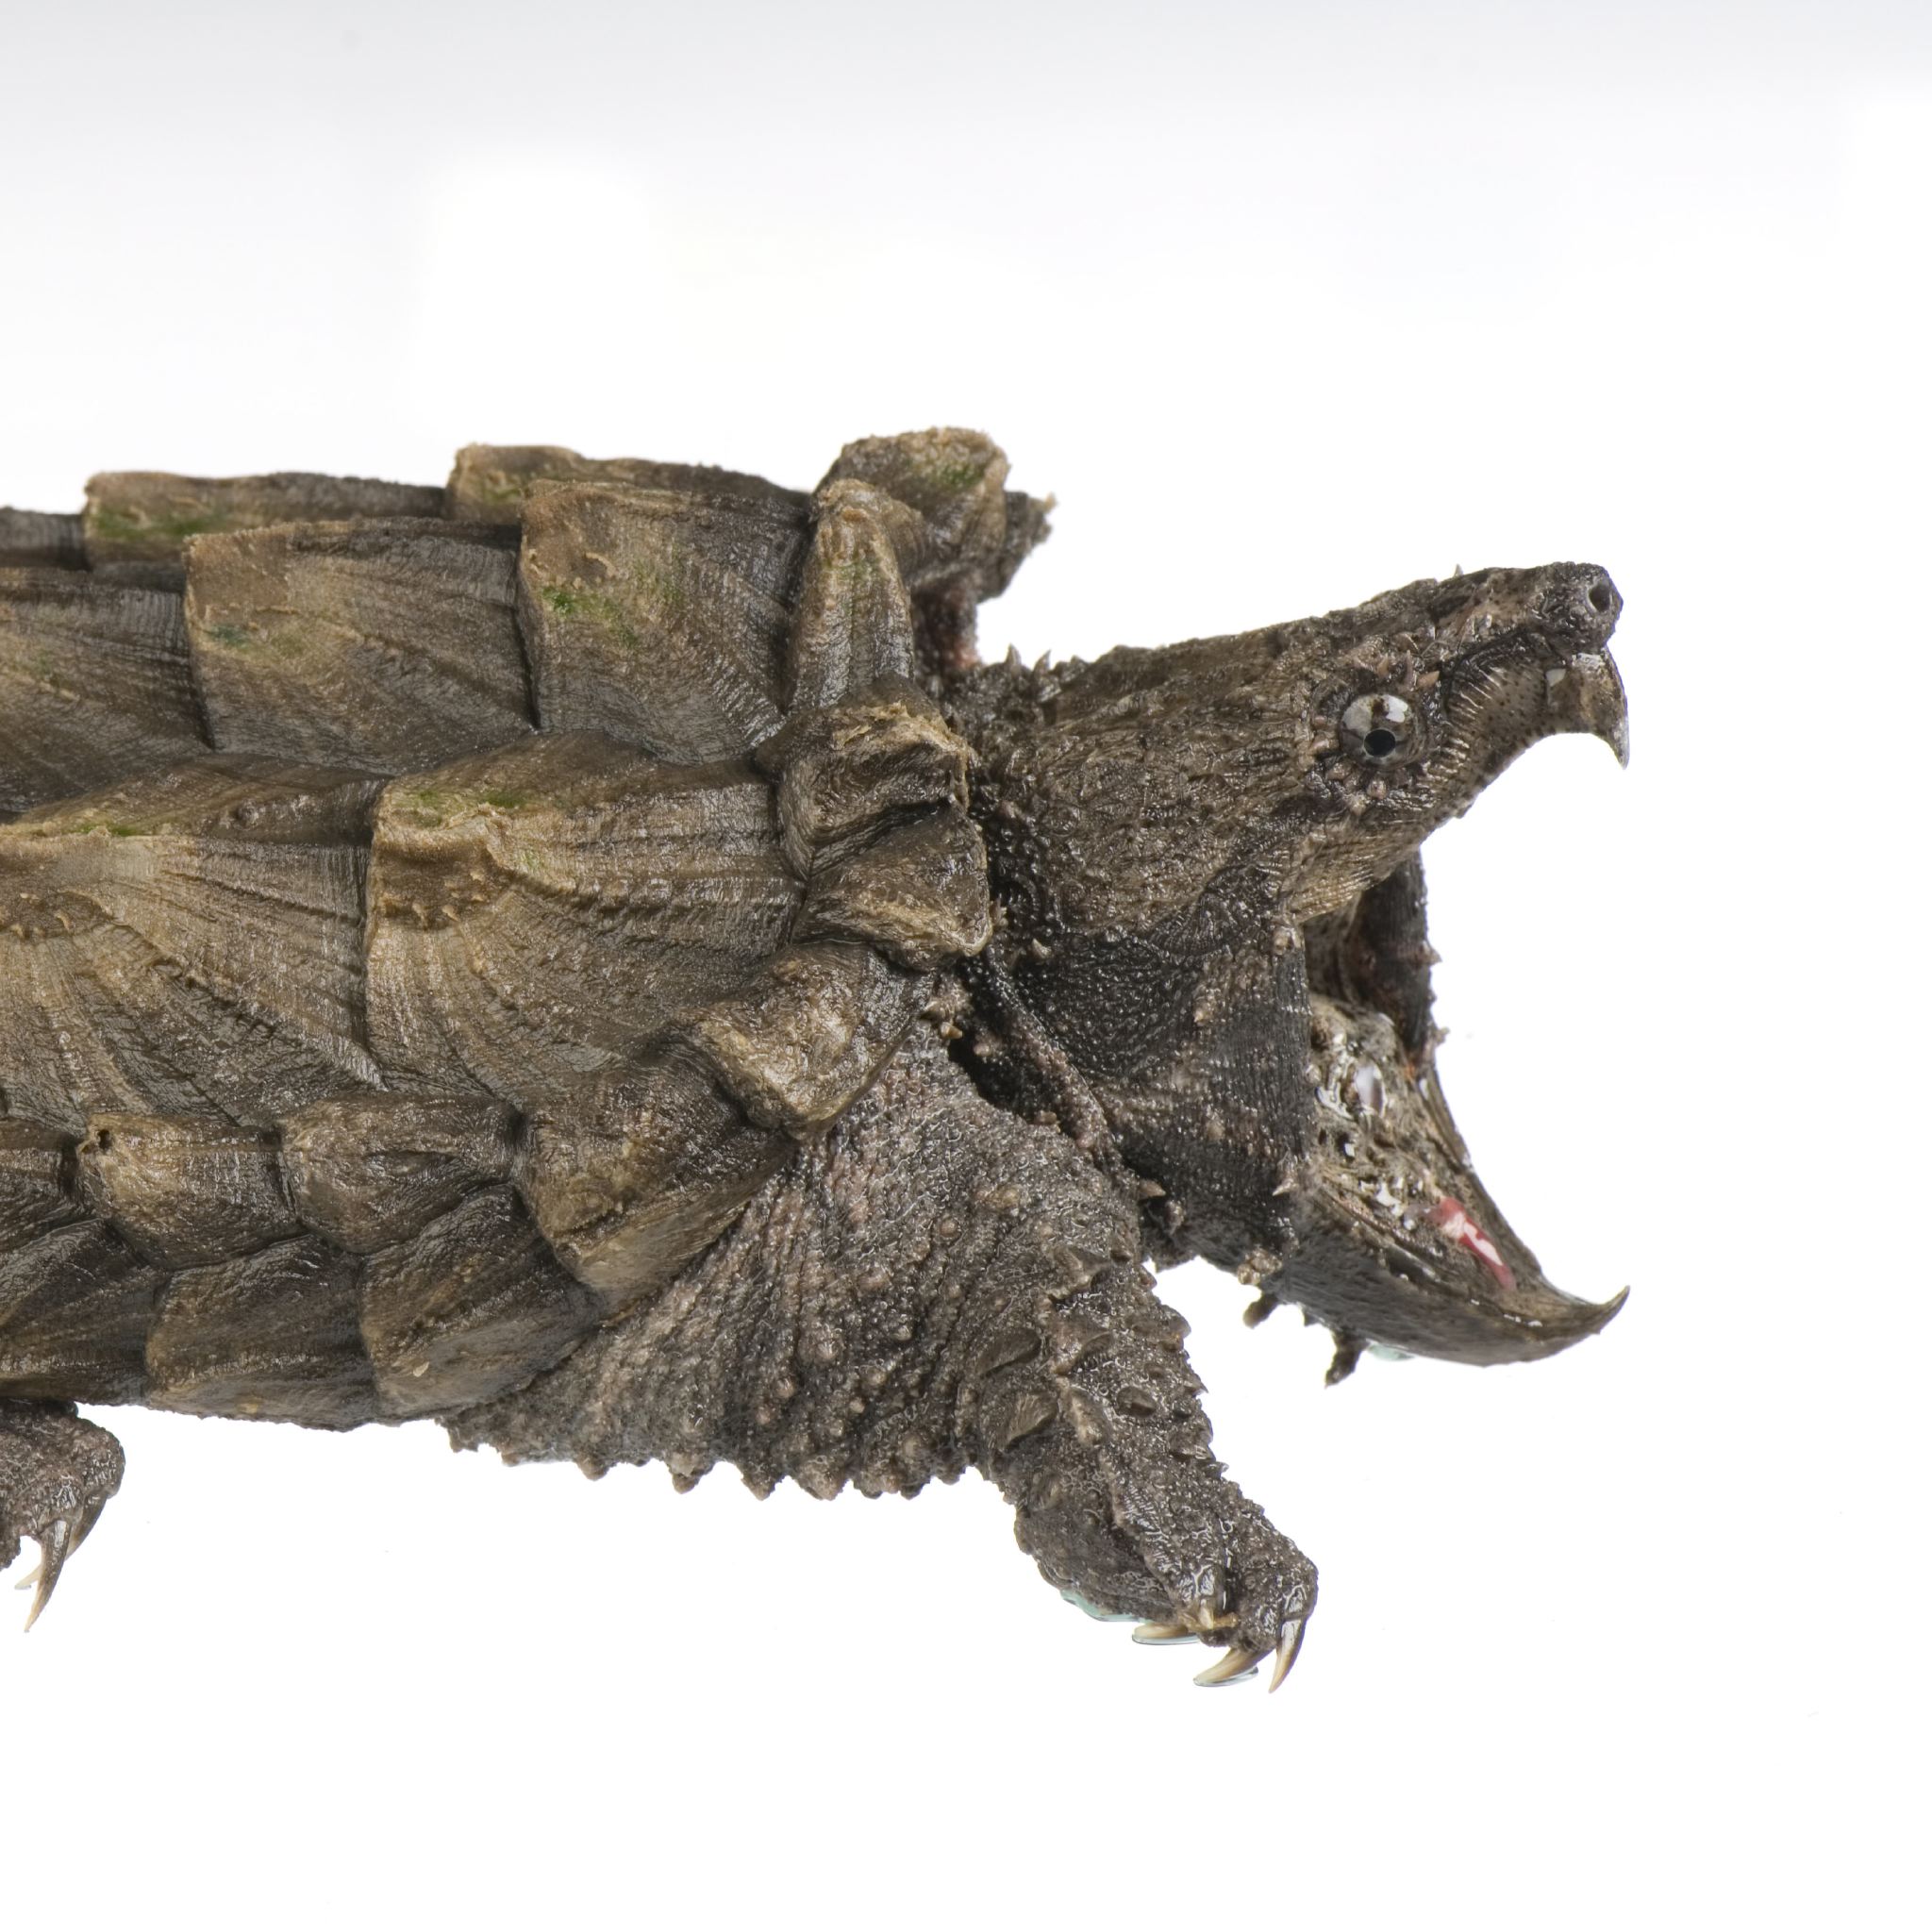 Alligator Snapping Turtle | National Geographic